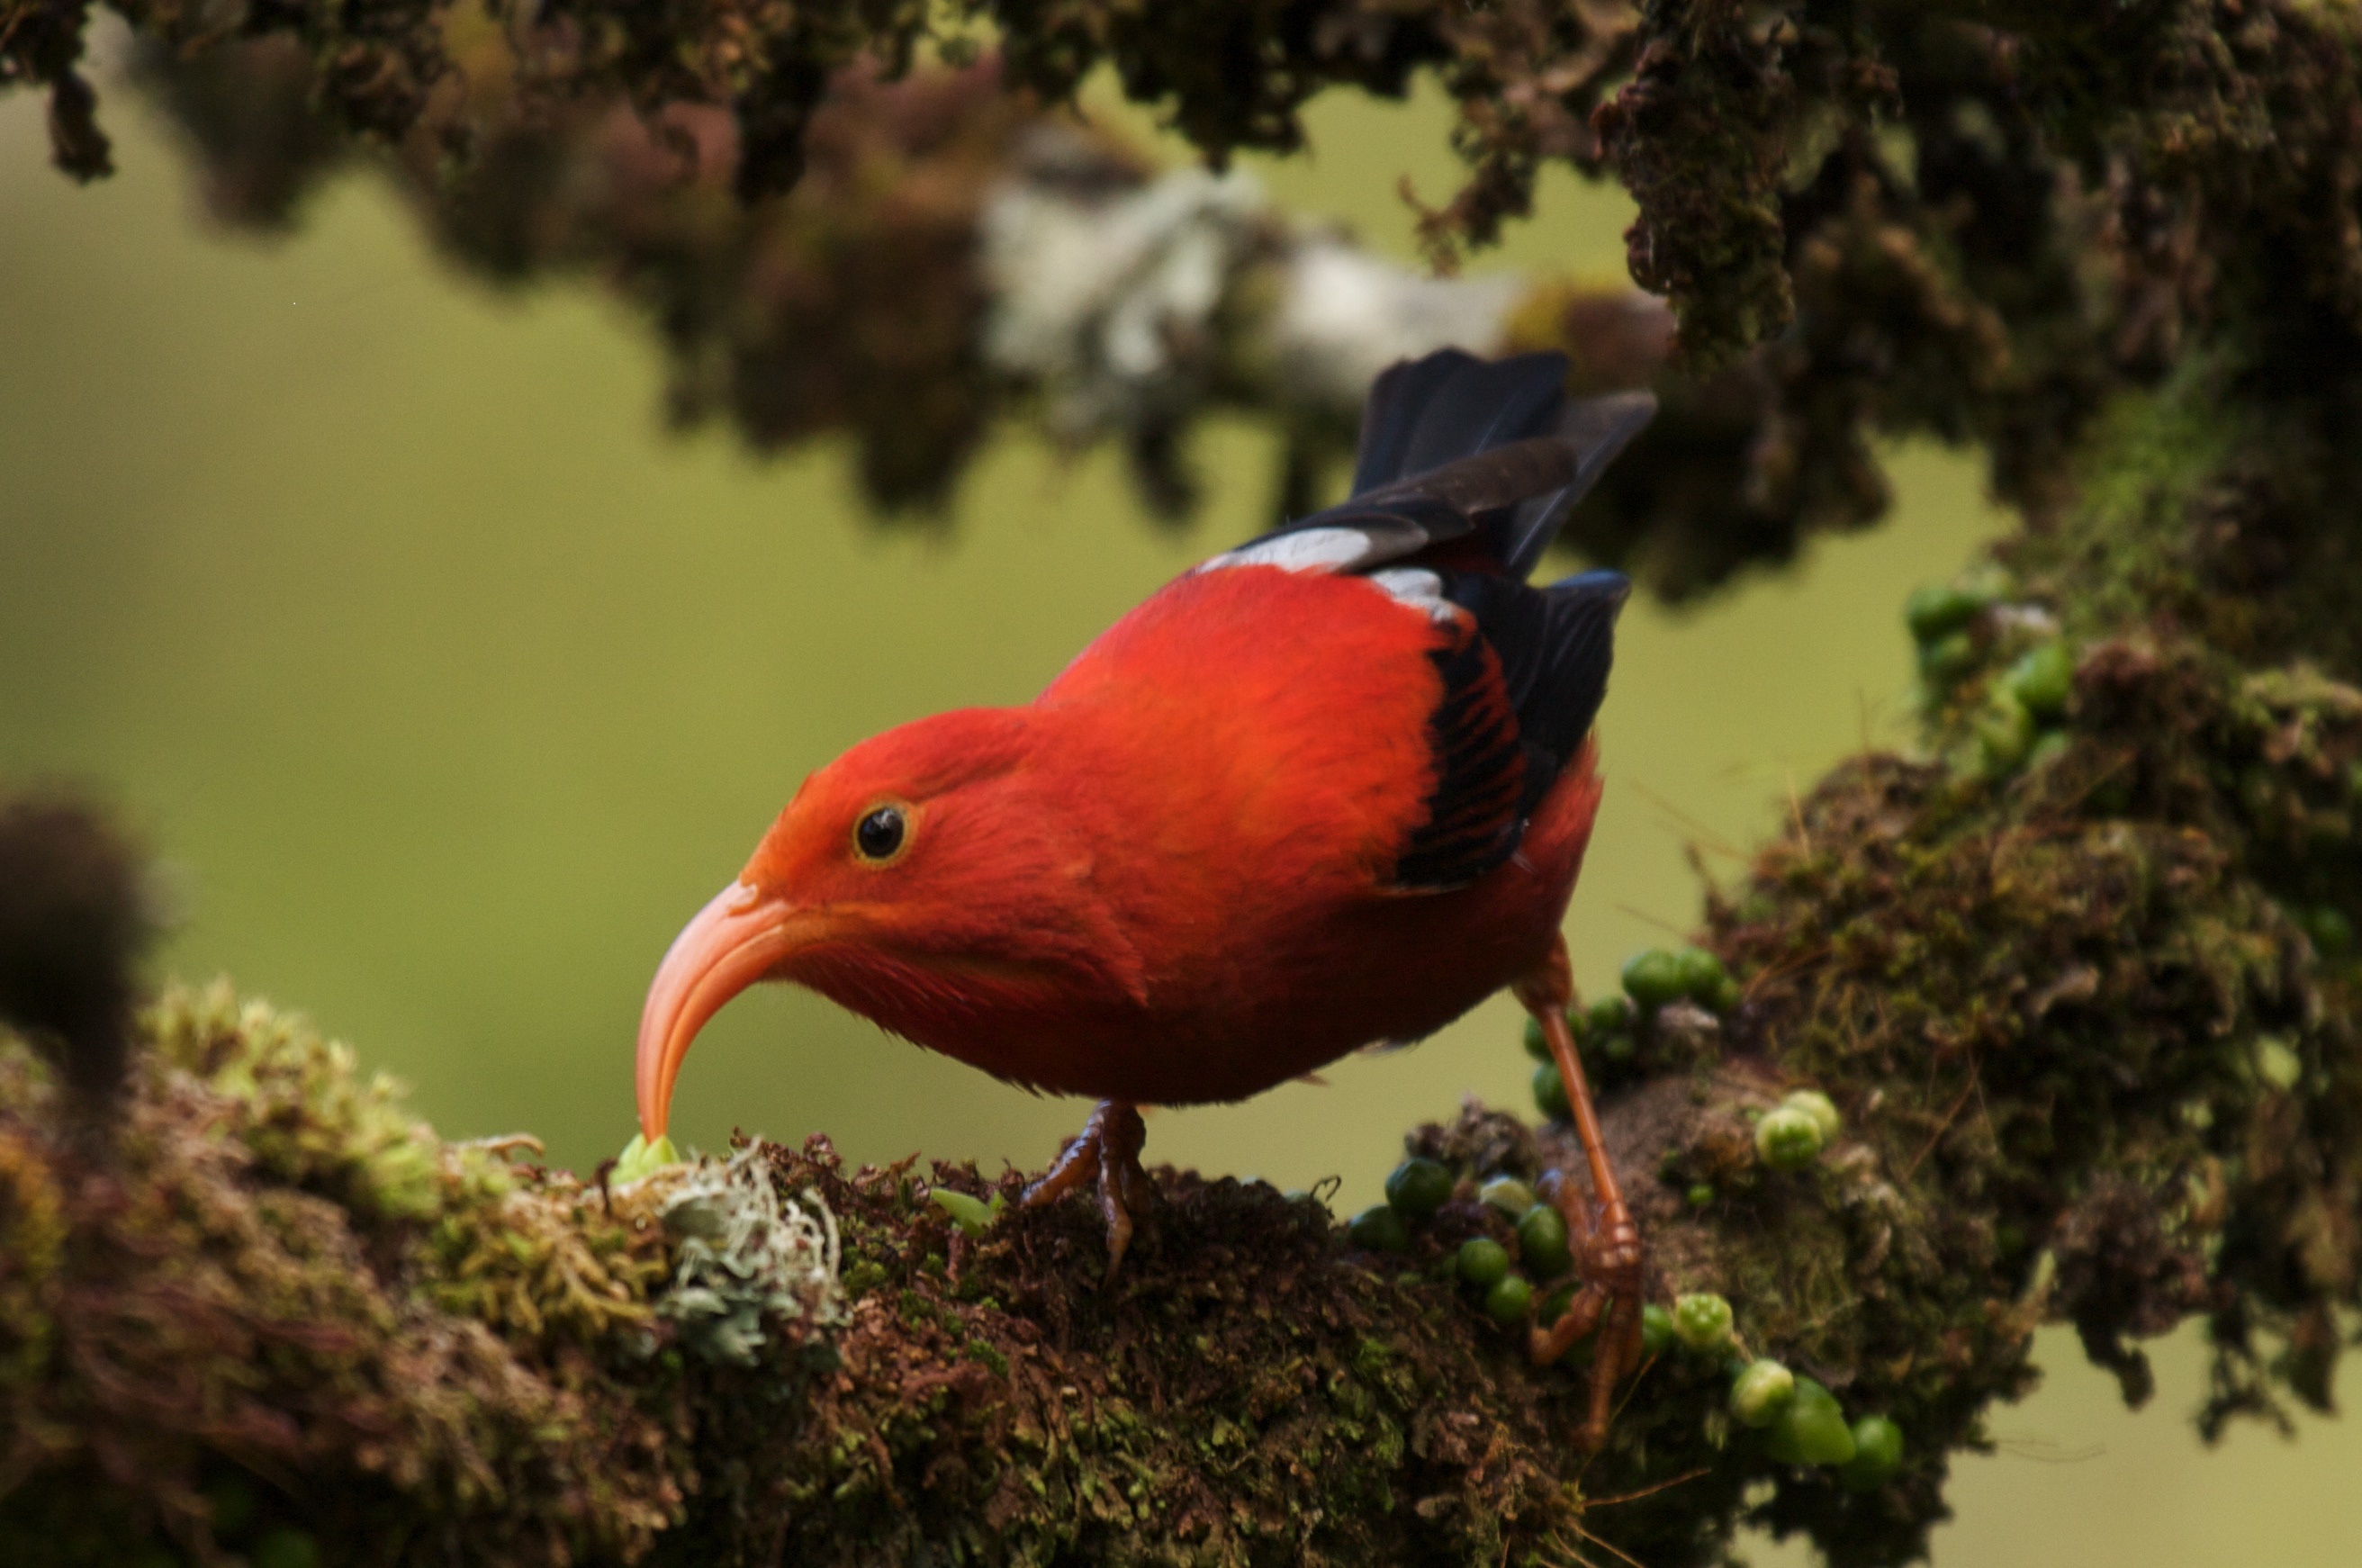 Honeycreeper Backgrounds, Compatible - PC, Mobile, Gadgets| 2624x1742 px